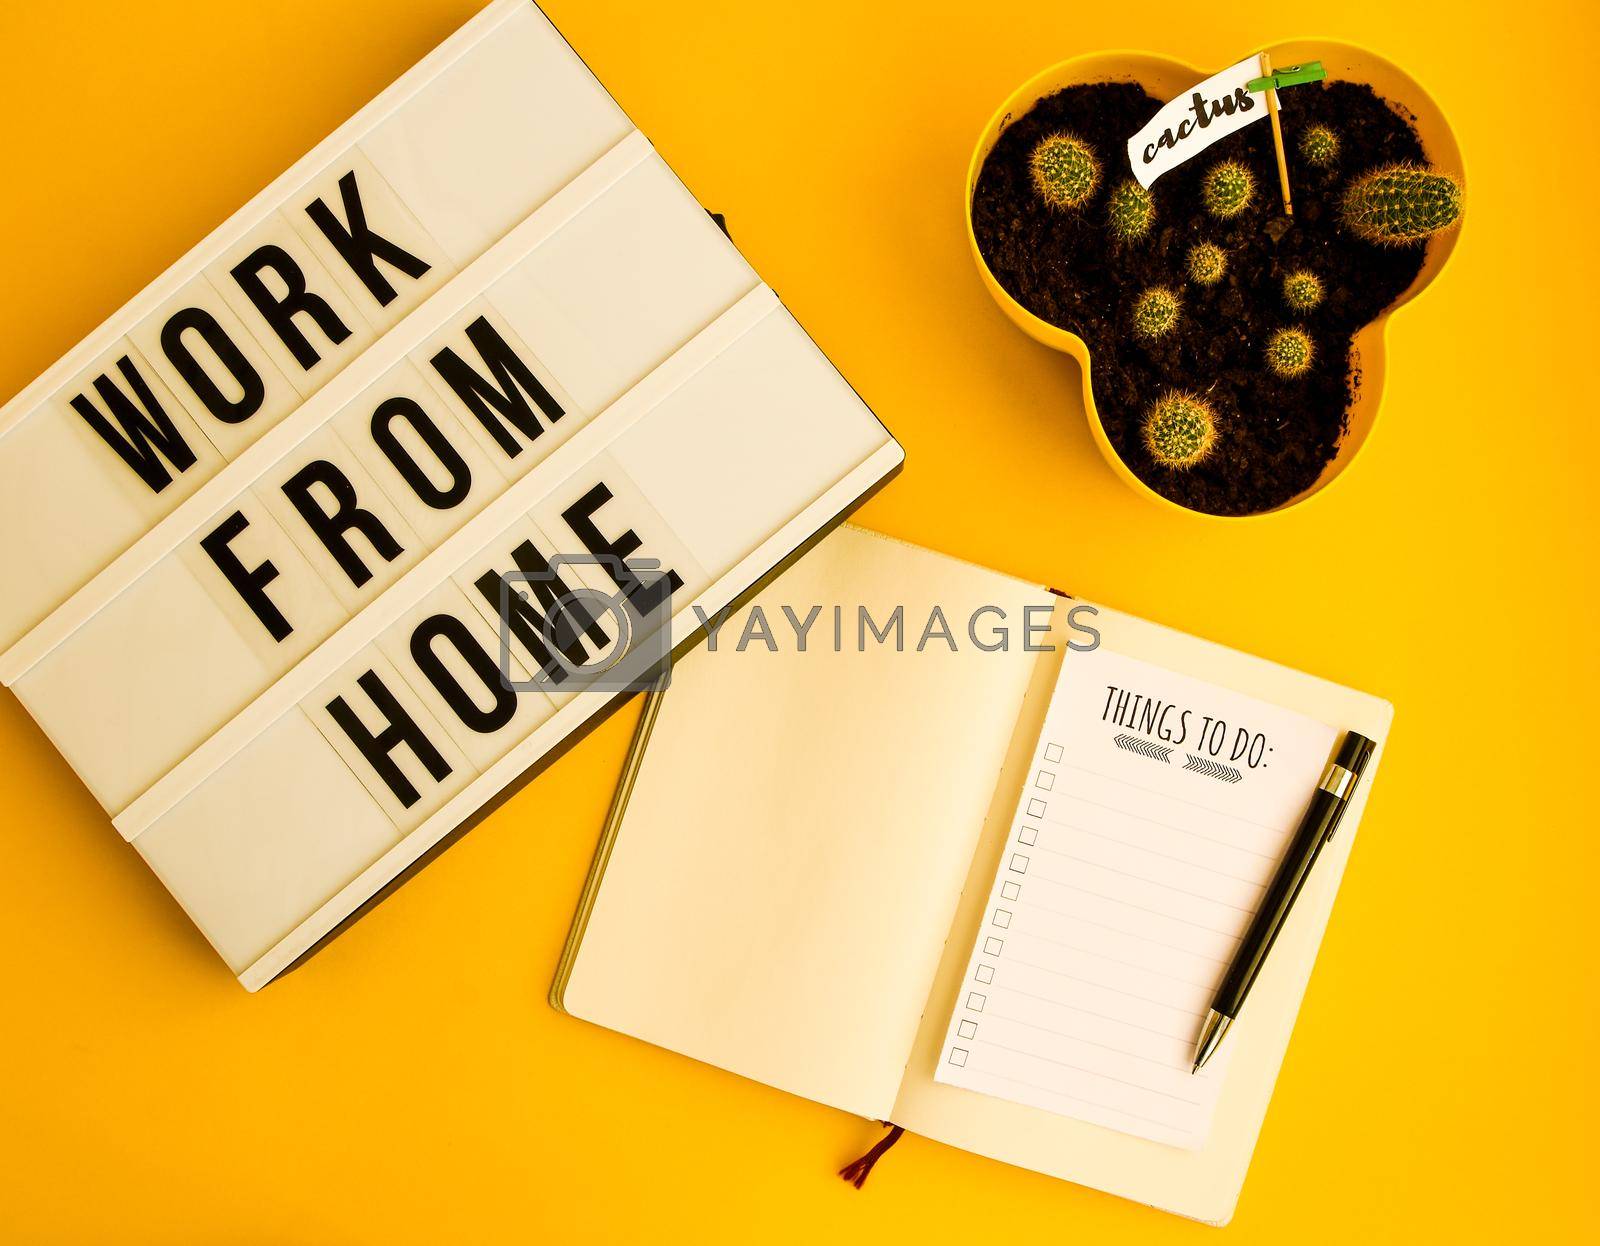 Royalty free image of lightbox with text WORK FROM HOME with notebook pen and cactus and TO DO list, copy space on yellow background, quarantine and isolation HOME OFFICE by anna_stasiia